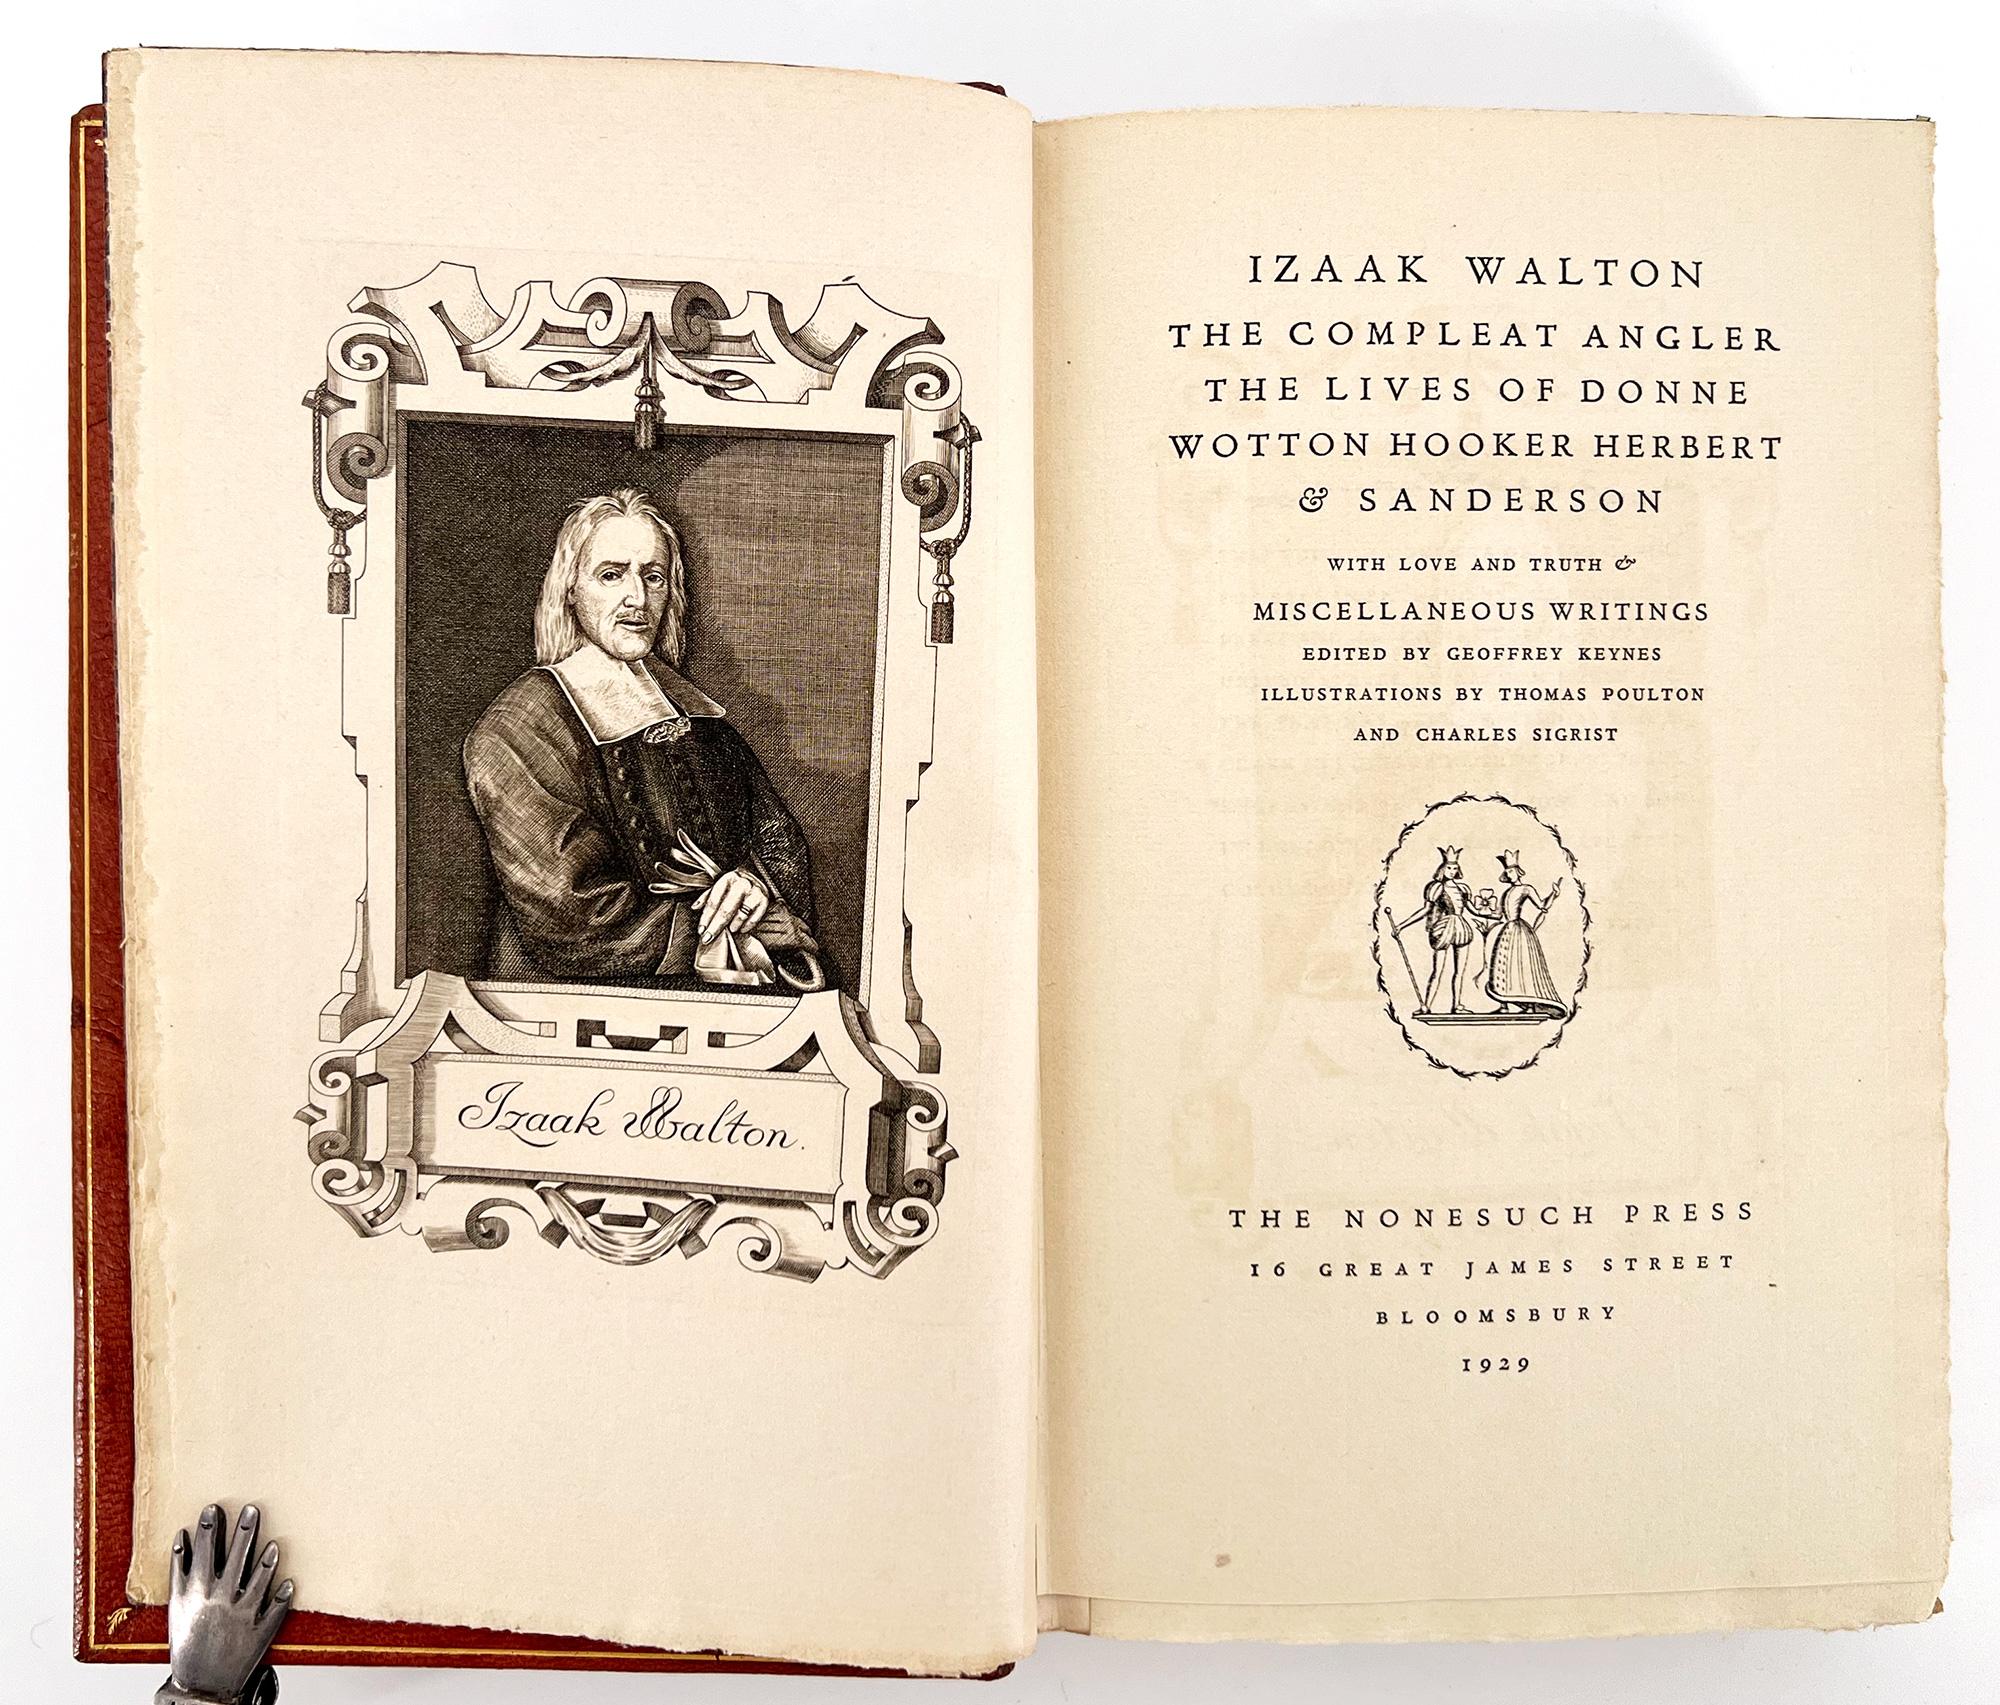 The first edition of Izzak Walton's (1593 – 1683) complete writings, this volume contains Walton's most famous work, the Compleat Angler from the edition of 1668 - with the variants of 1676 as an appendix [Satchell p. 5] - in which Walton celebrates